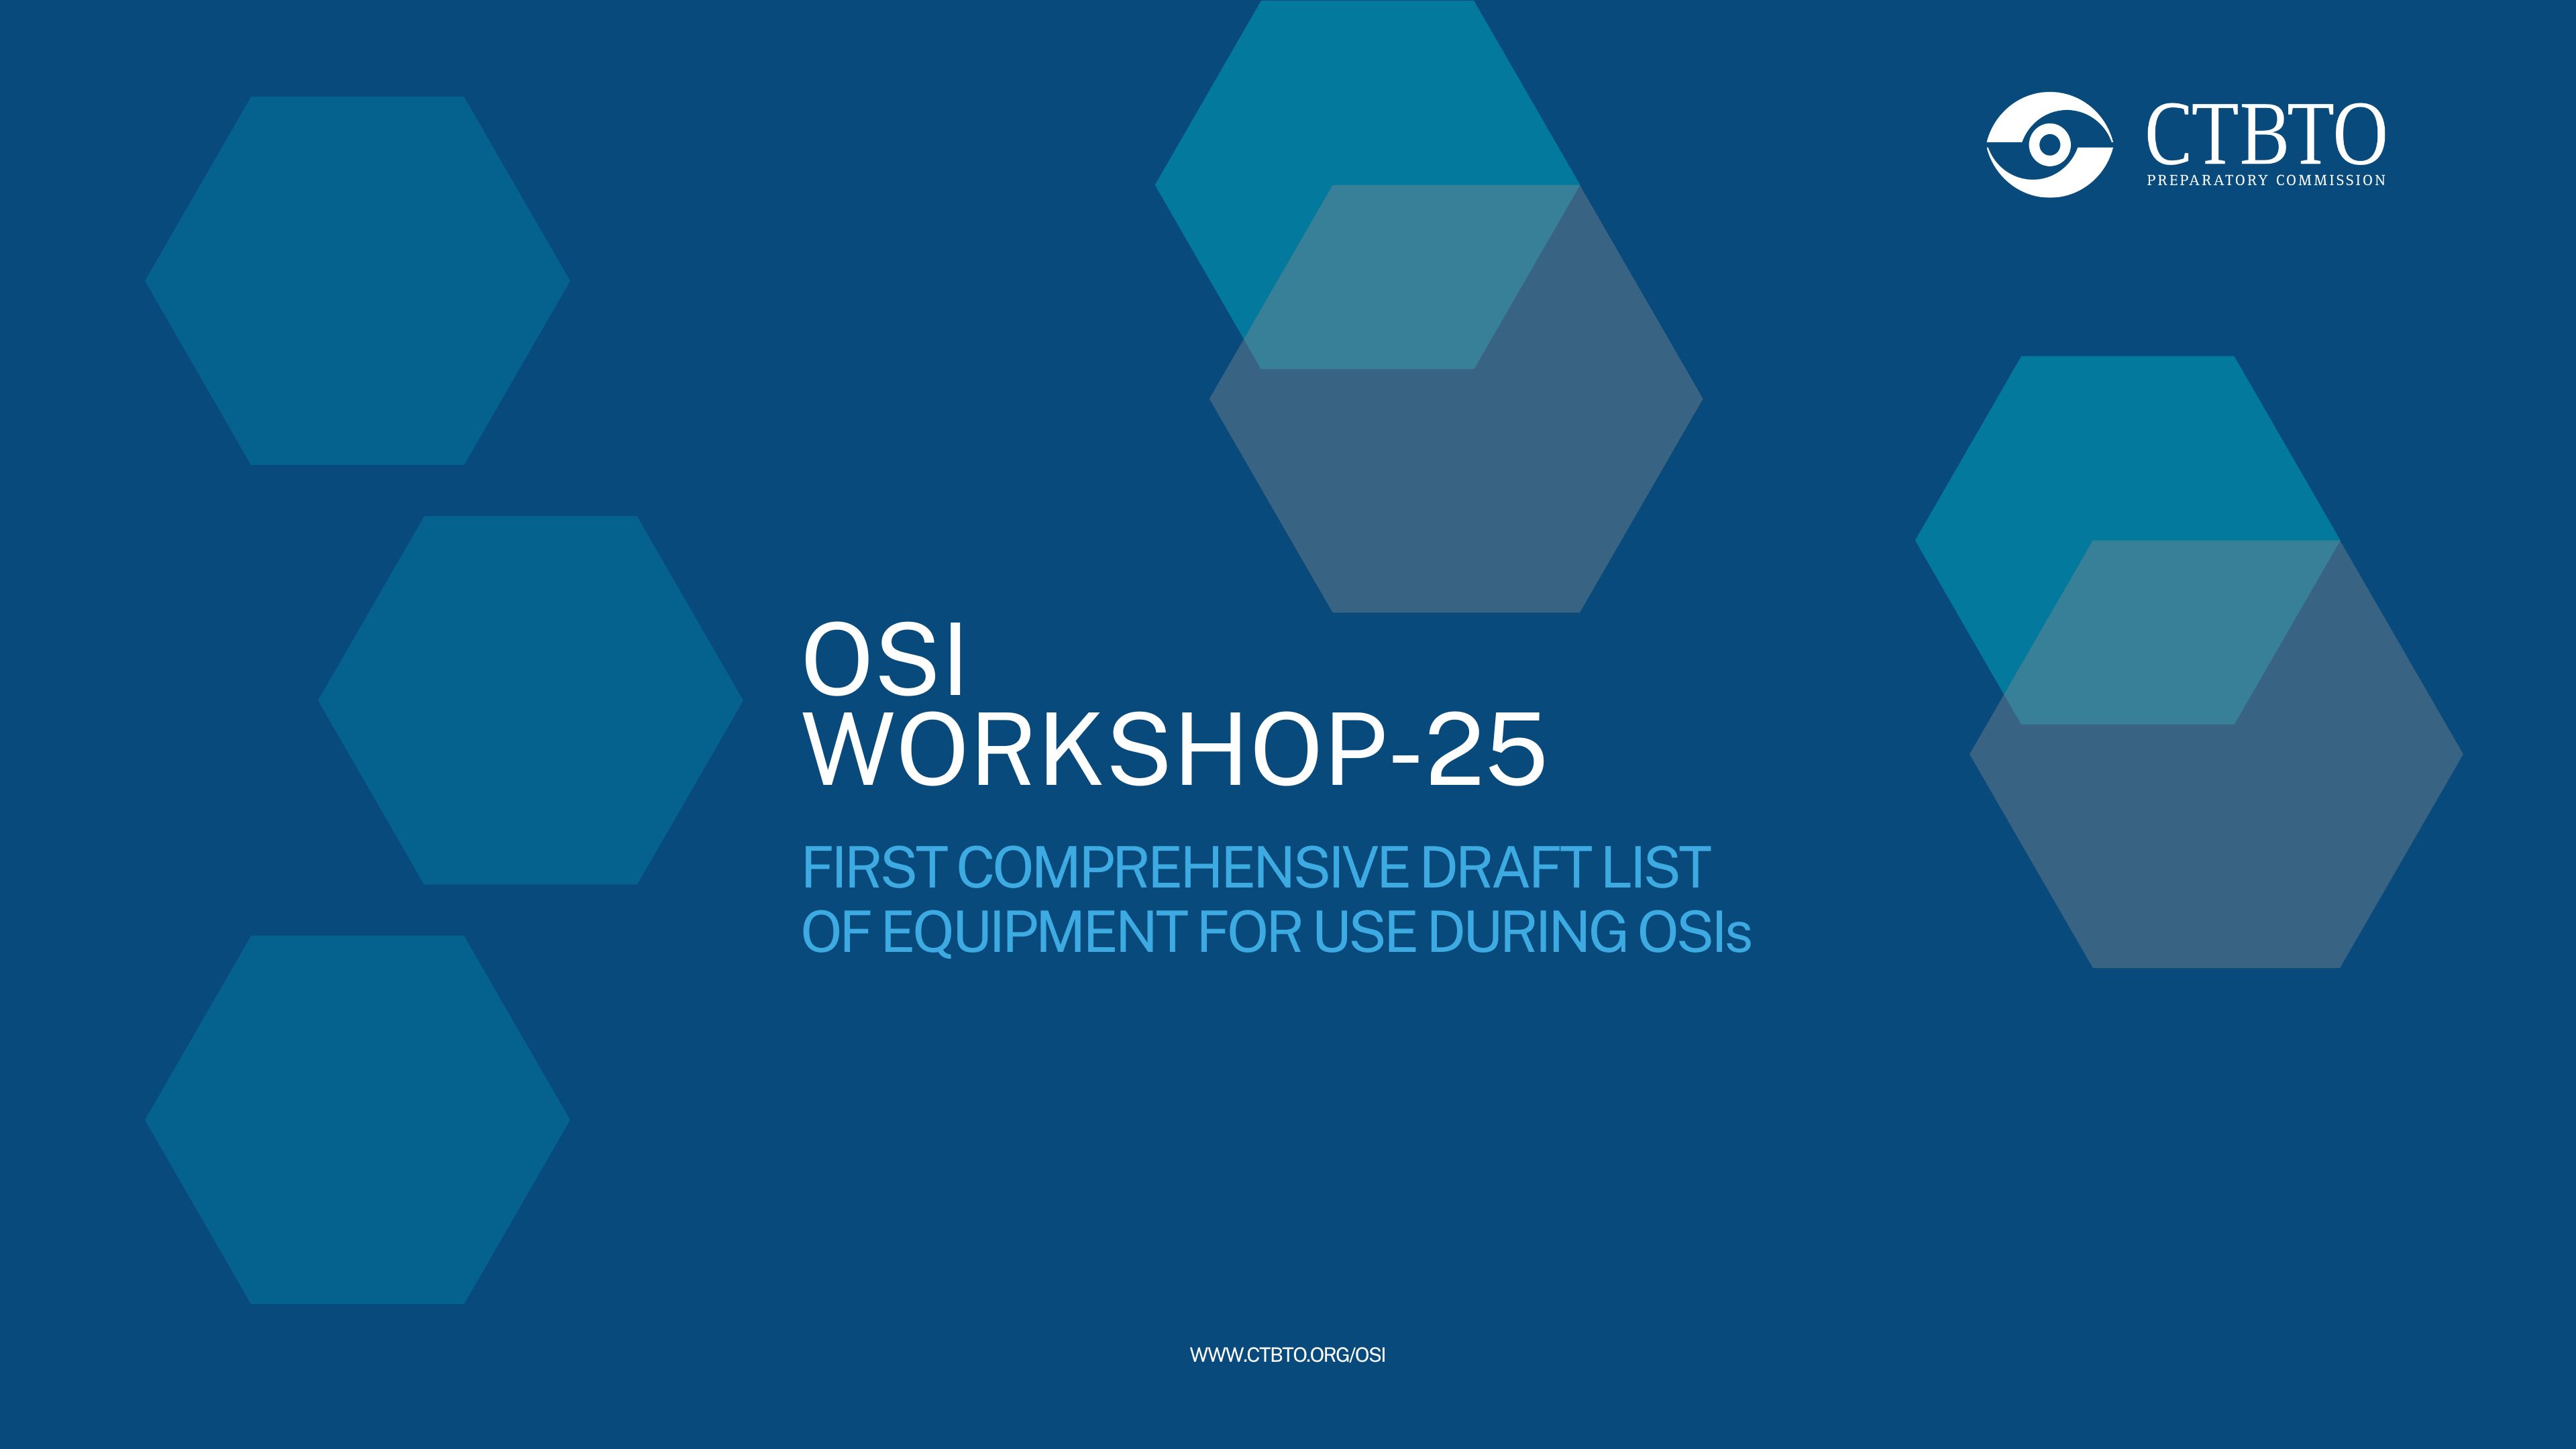 Poster for OSI